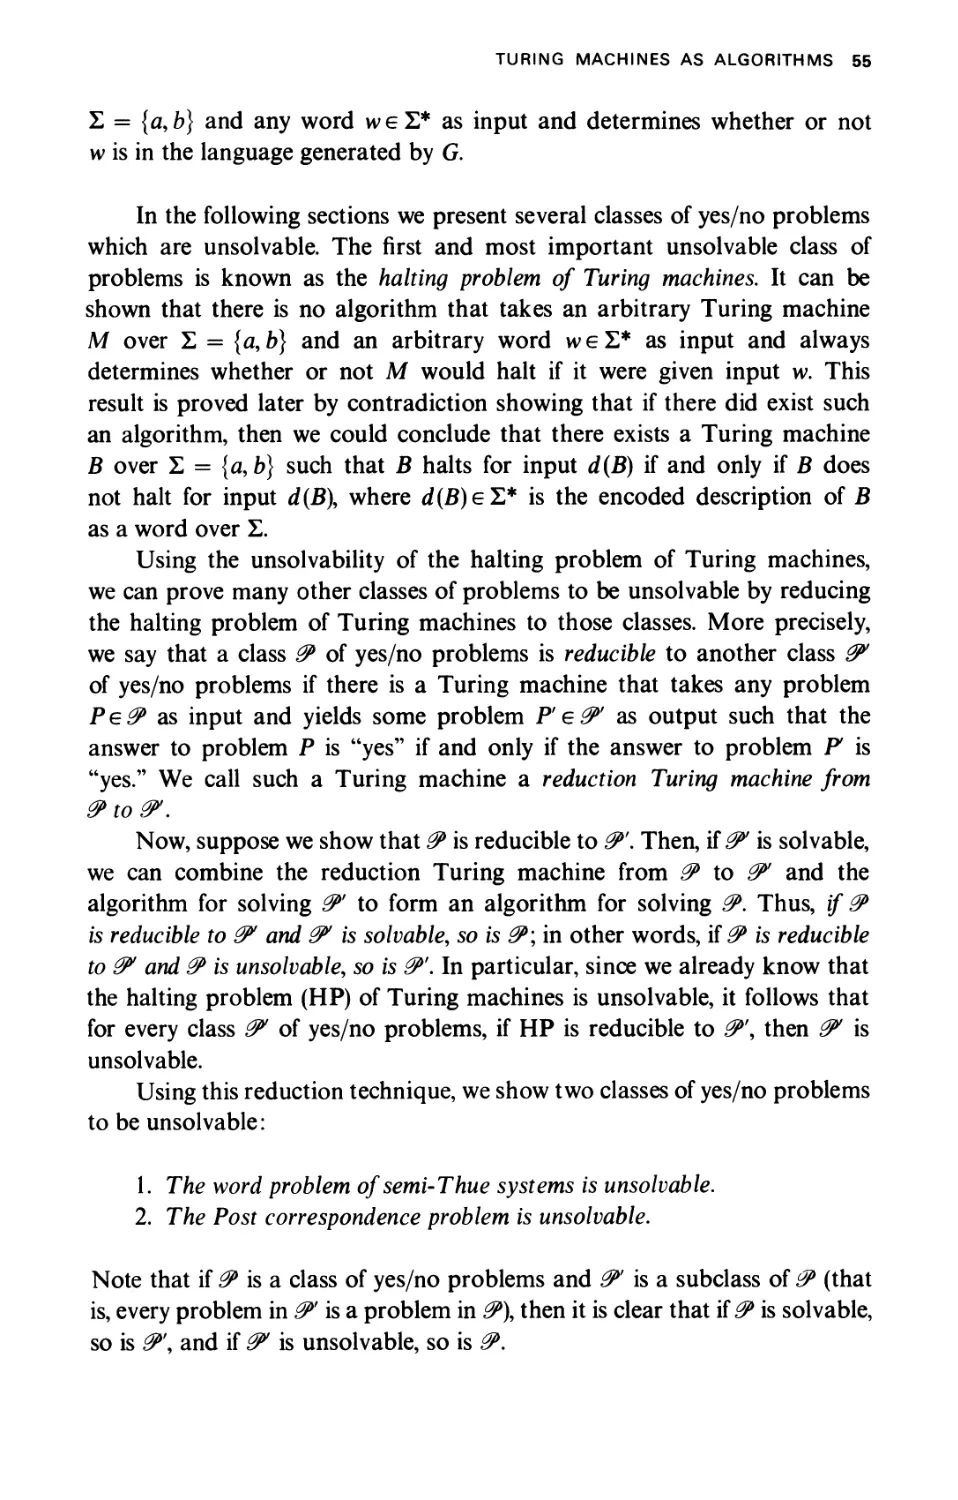 1-5.2 The Halting Problem of Turing Machines